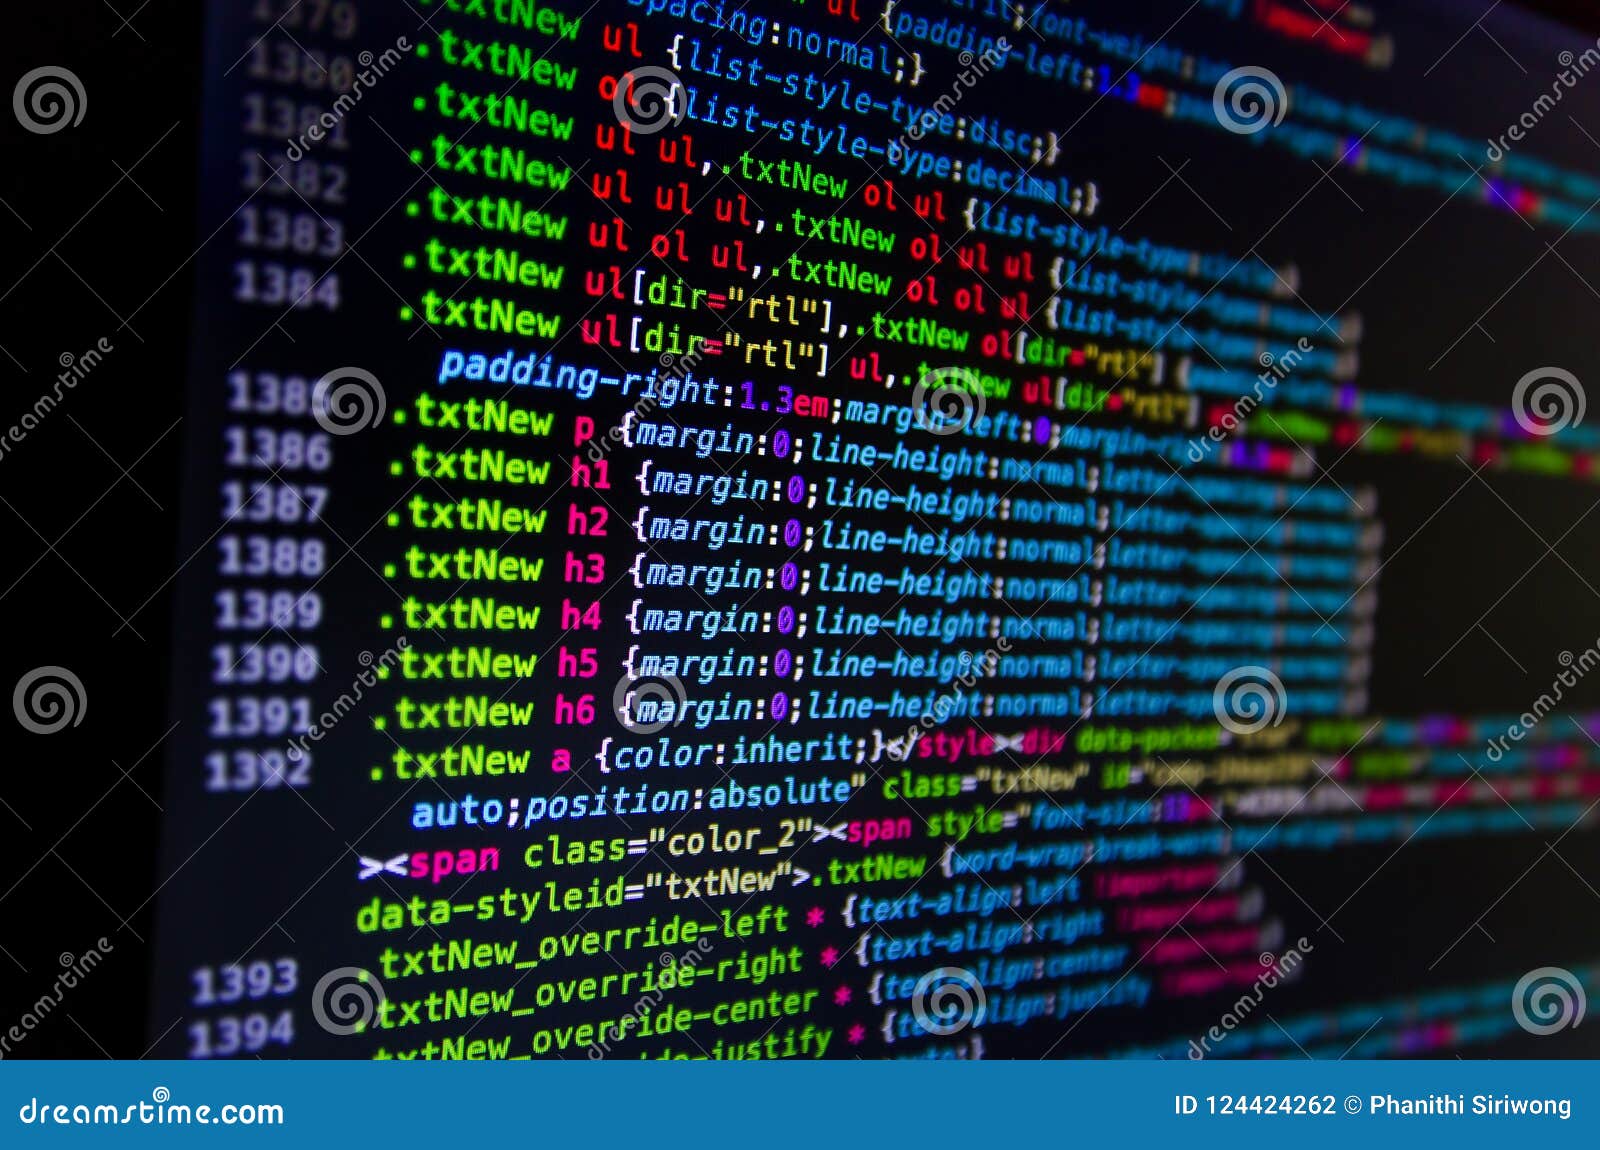 Desktop Source Code and Wallpaper by Computer Language with Coding and  Programming. Stock Image - Image of develop, black: 124706065